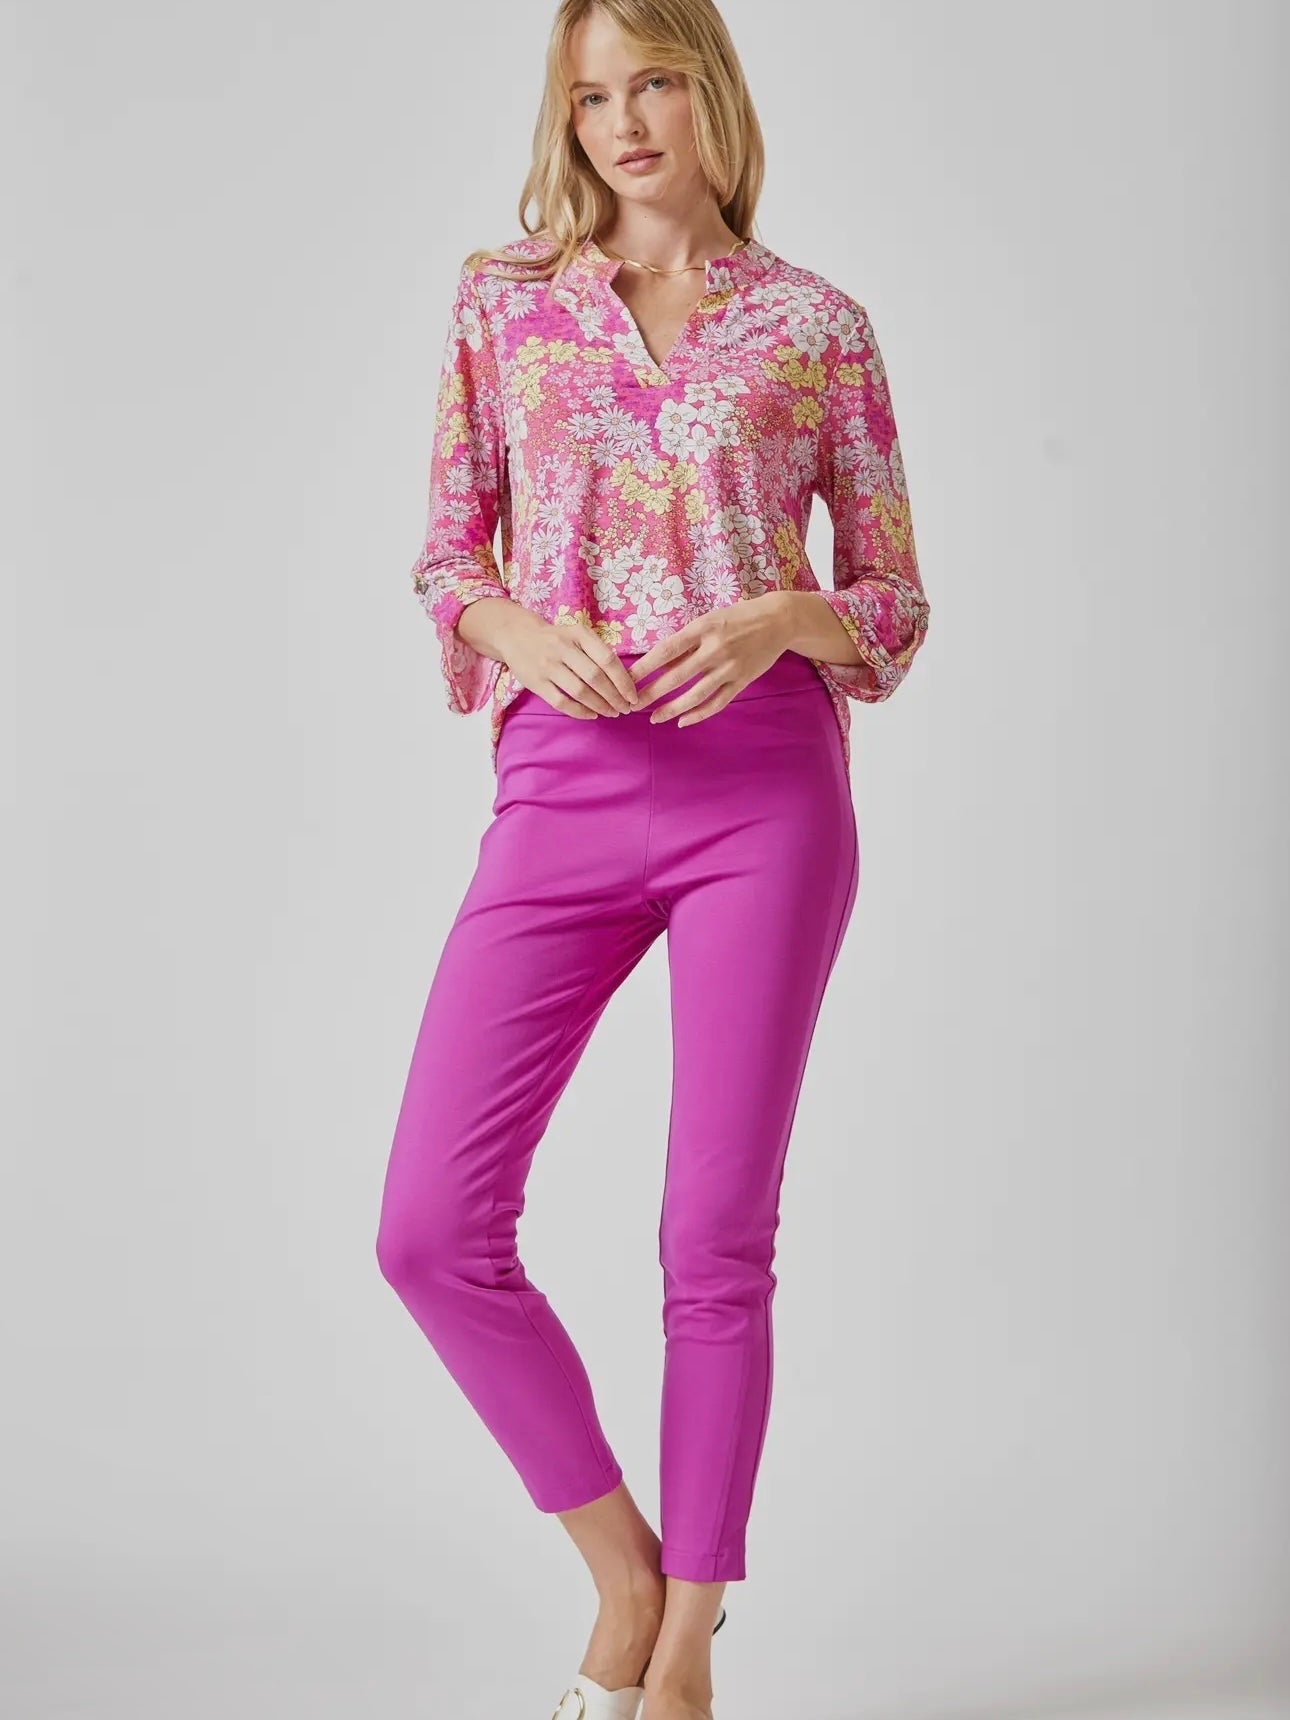 Pink Floral Lizzy Blouse